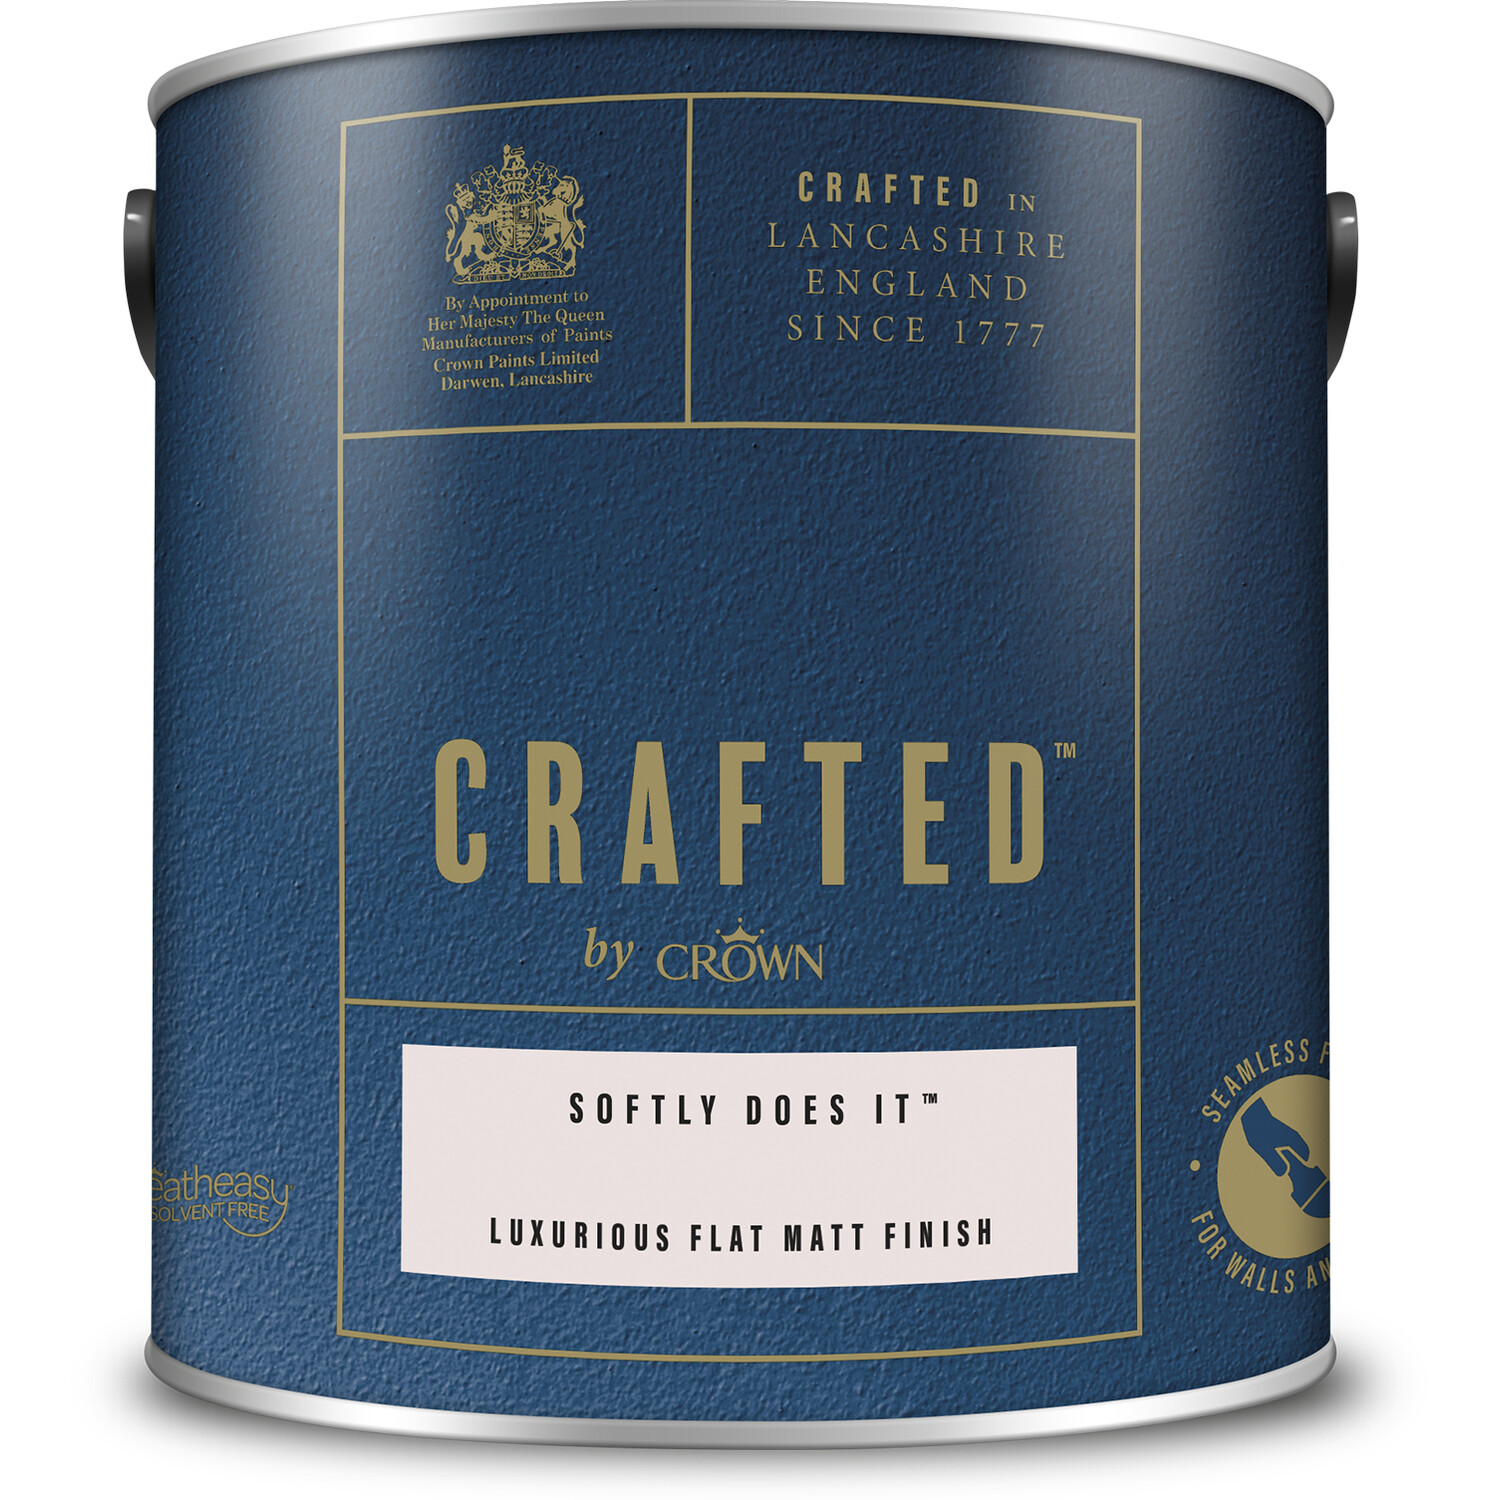 Crown Crafted Walls and Wood Softly Does It Luxurious Flat Matt Paint 2.5L Image 2